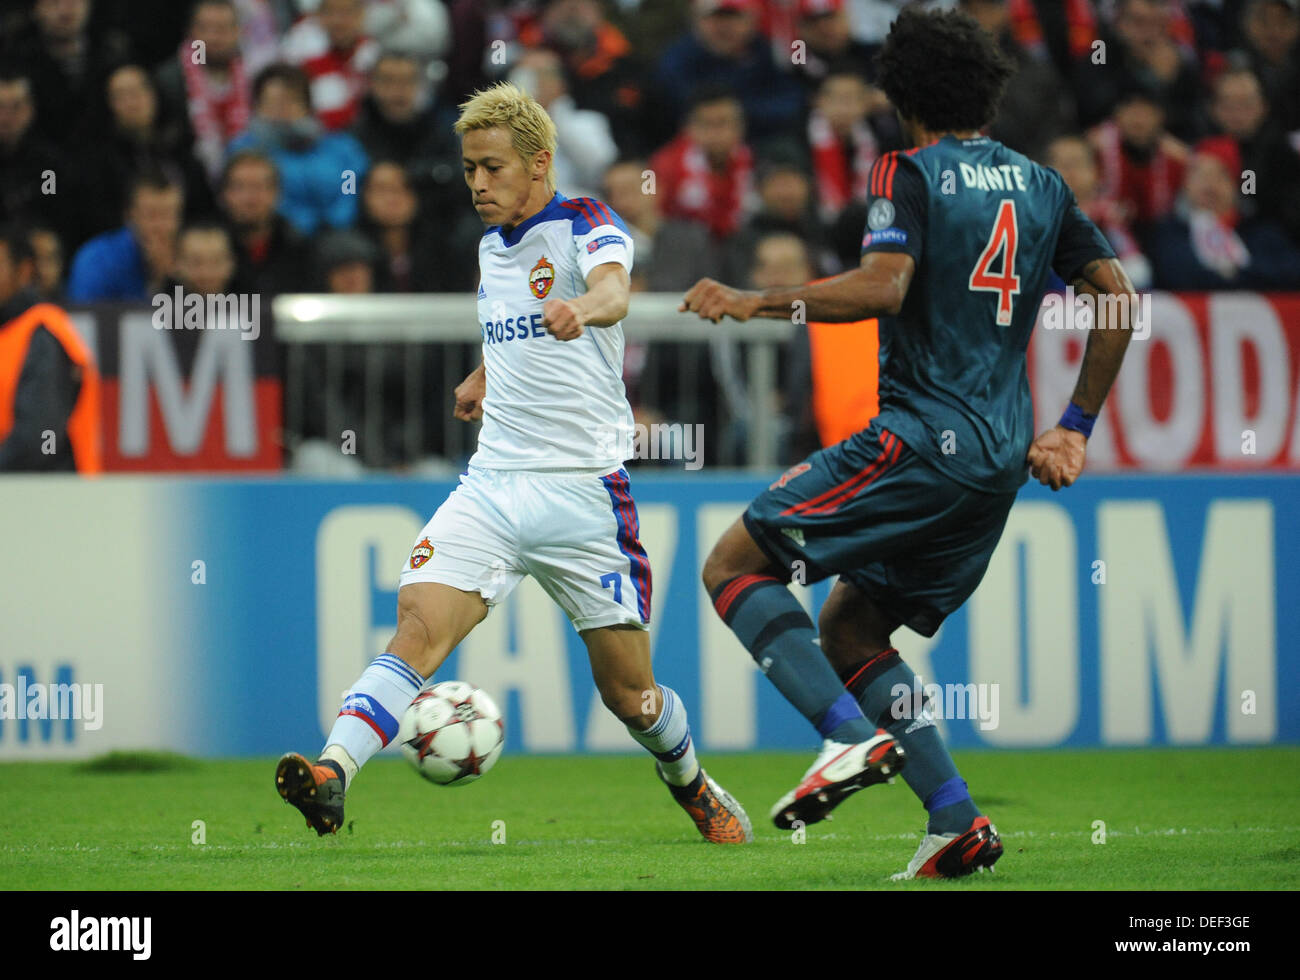 Munich's Dante (R) and Moscow's Keisuke Honda vie for the ball during the UEFA Champions League Group D soccer match between FC Bayern Munich and CSKA Moscow at München Arena in Munich, Germany, 17 September 2013. Photo: Andreas Gebert/dpa Stock Photo